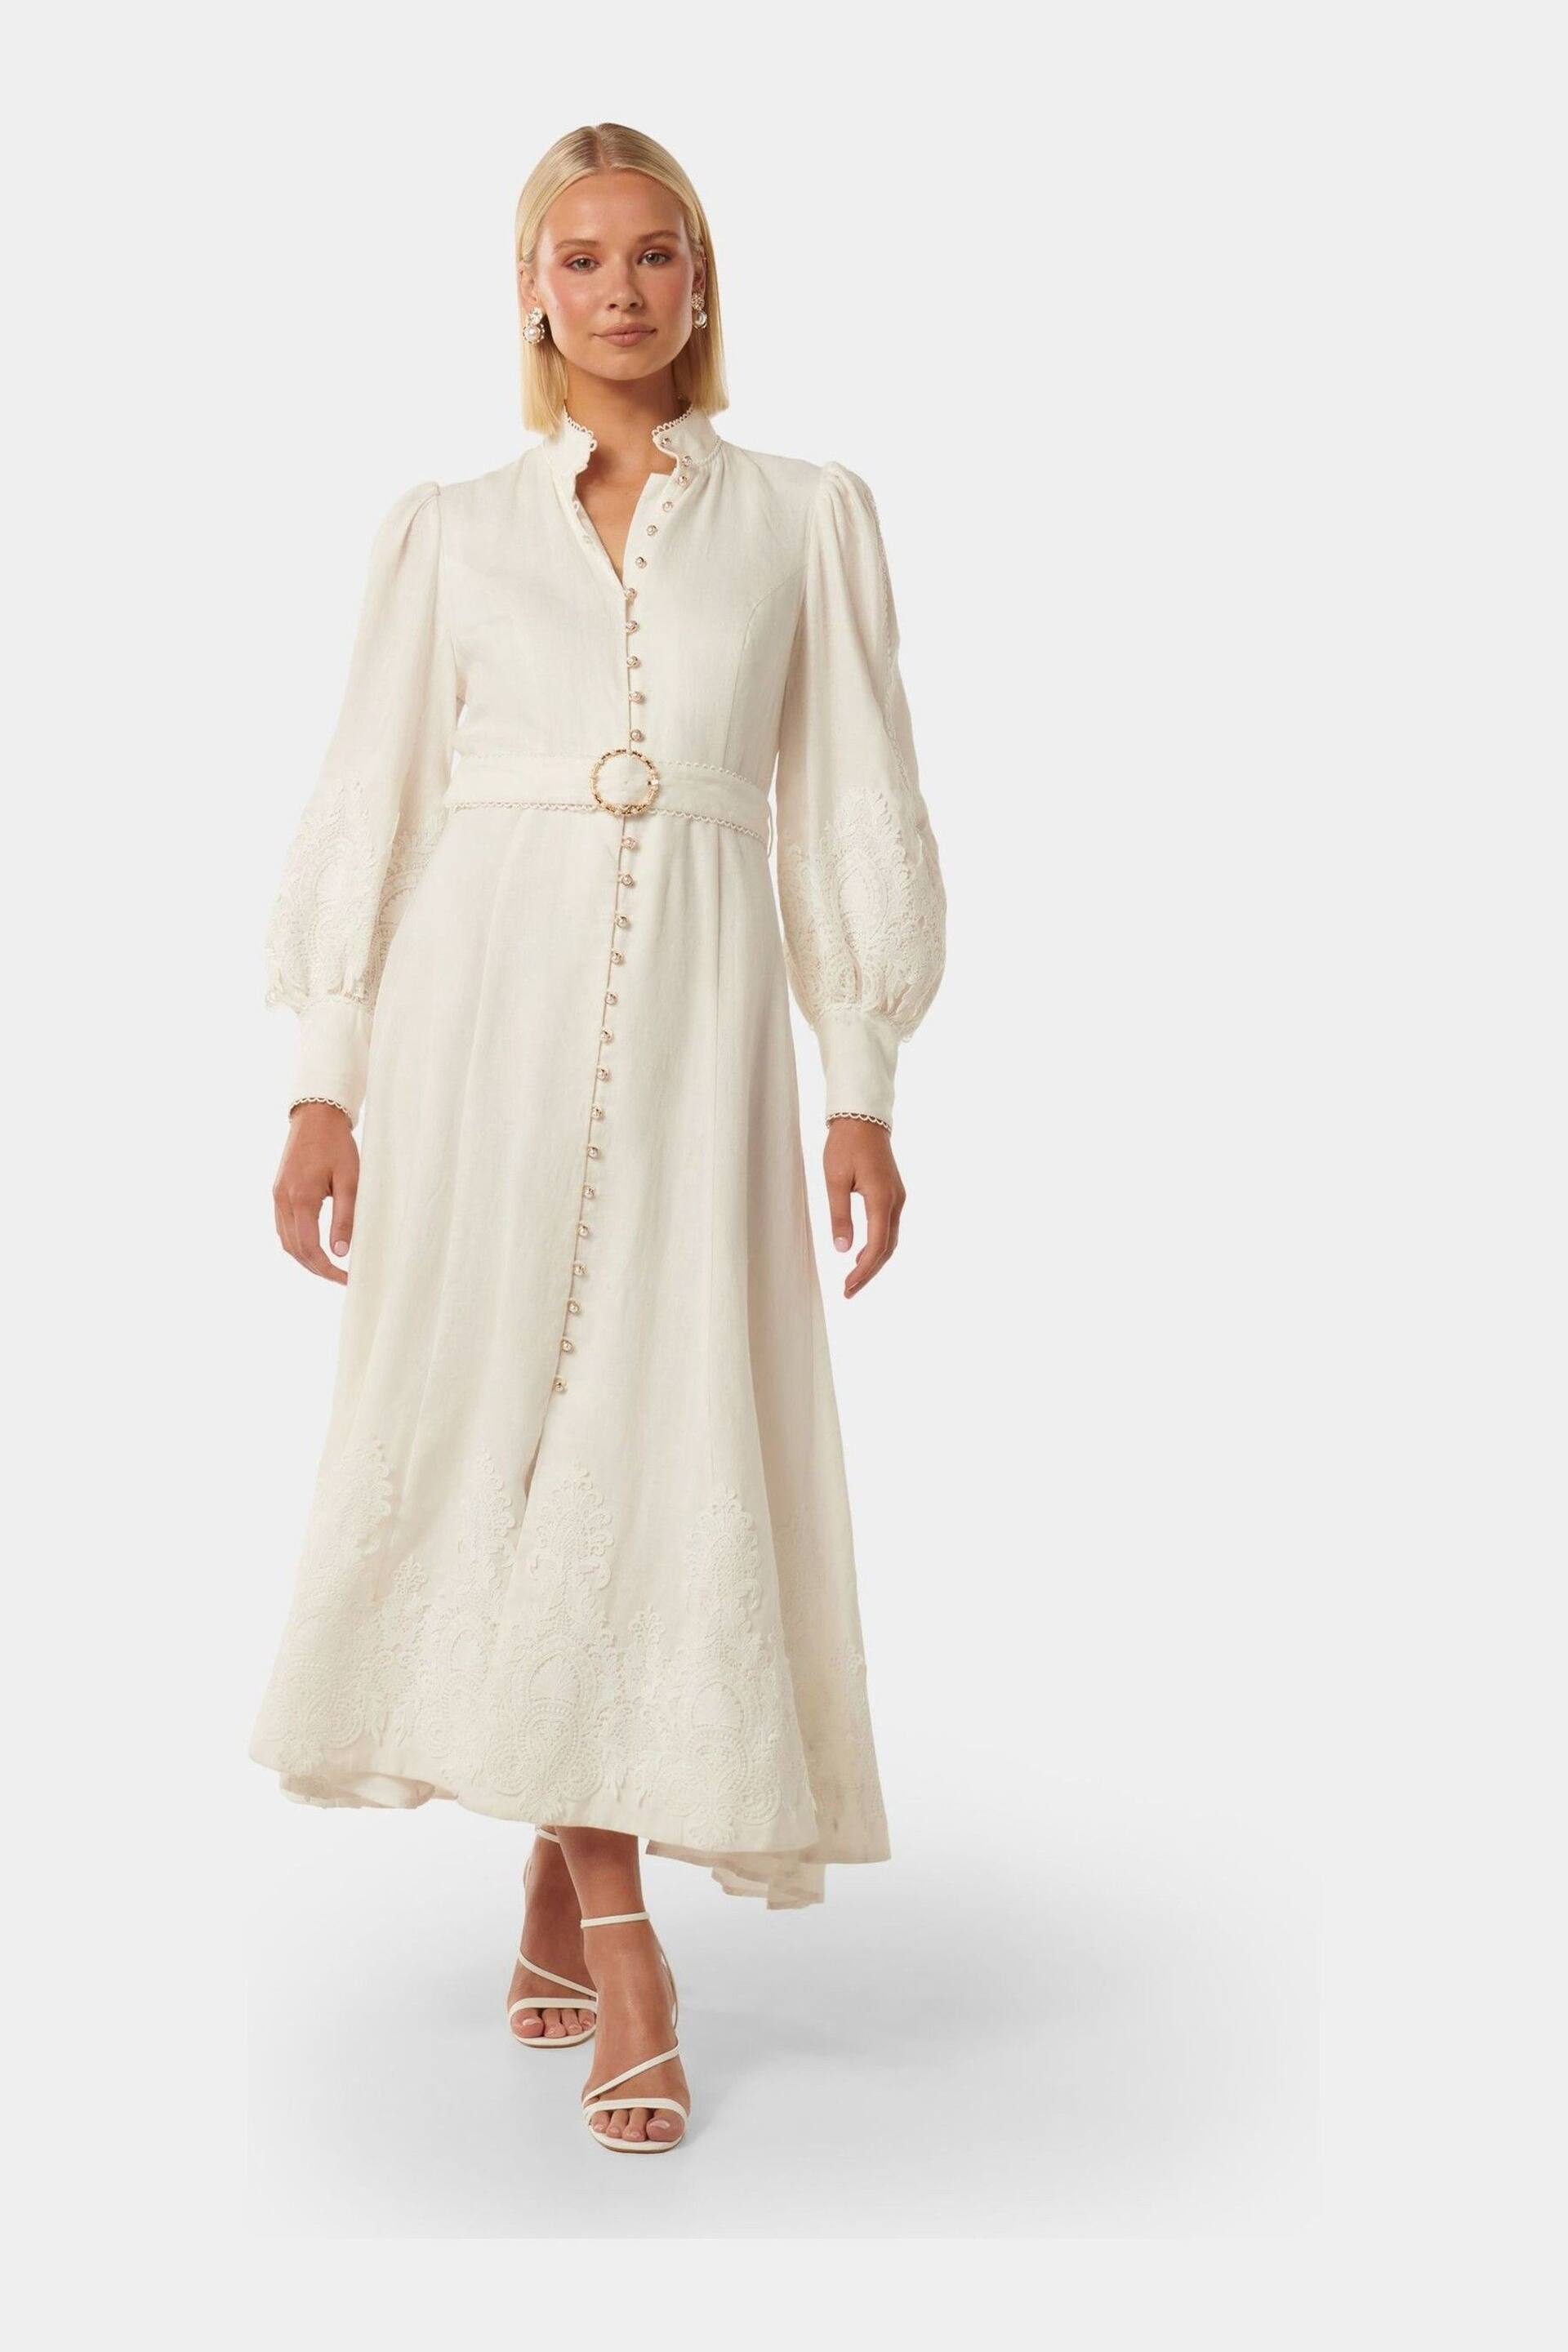 Forever New White Pure Linen Allegra Lace Detail Midi Dress - Image 1 of 4